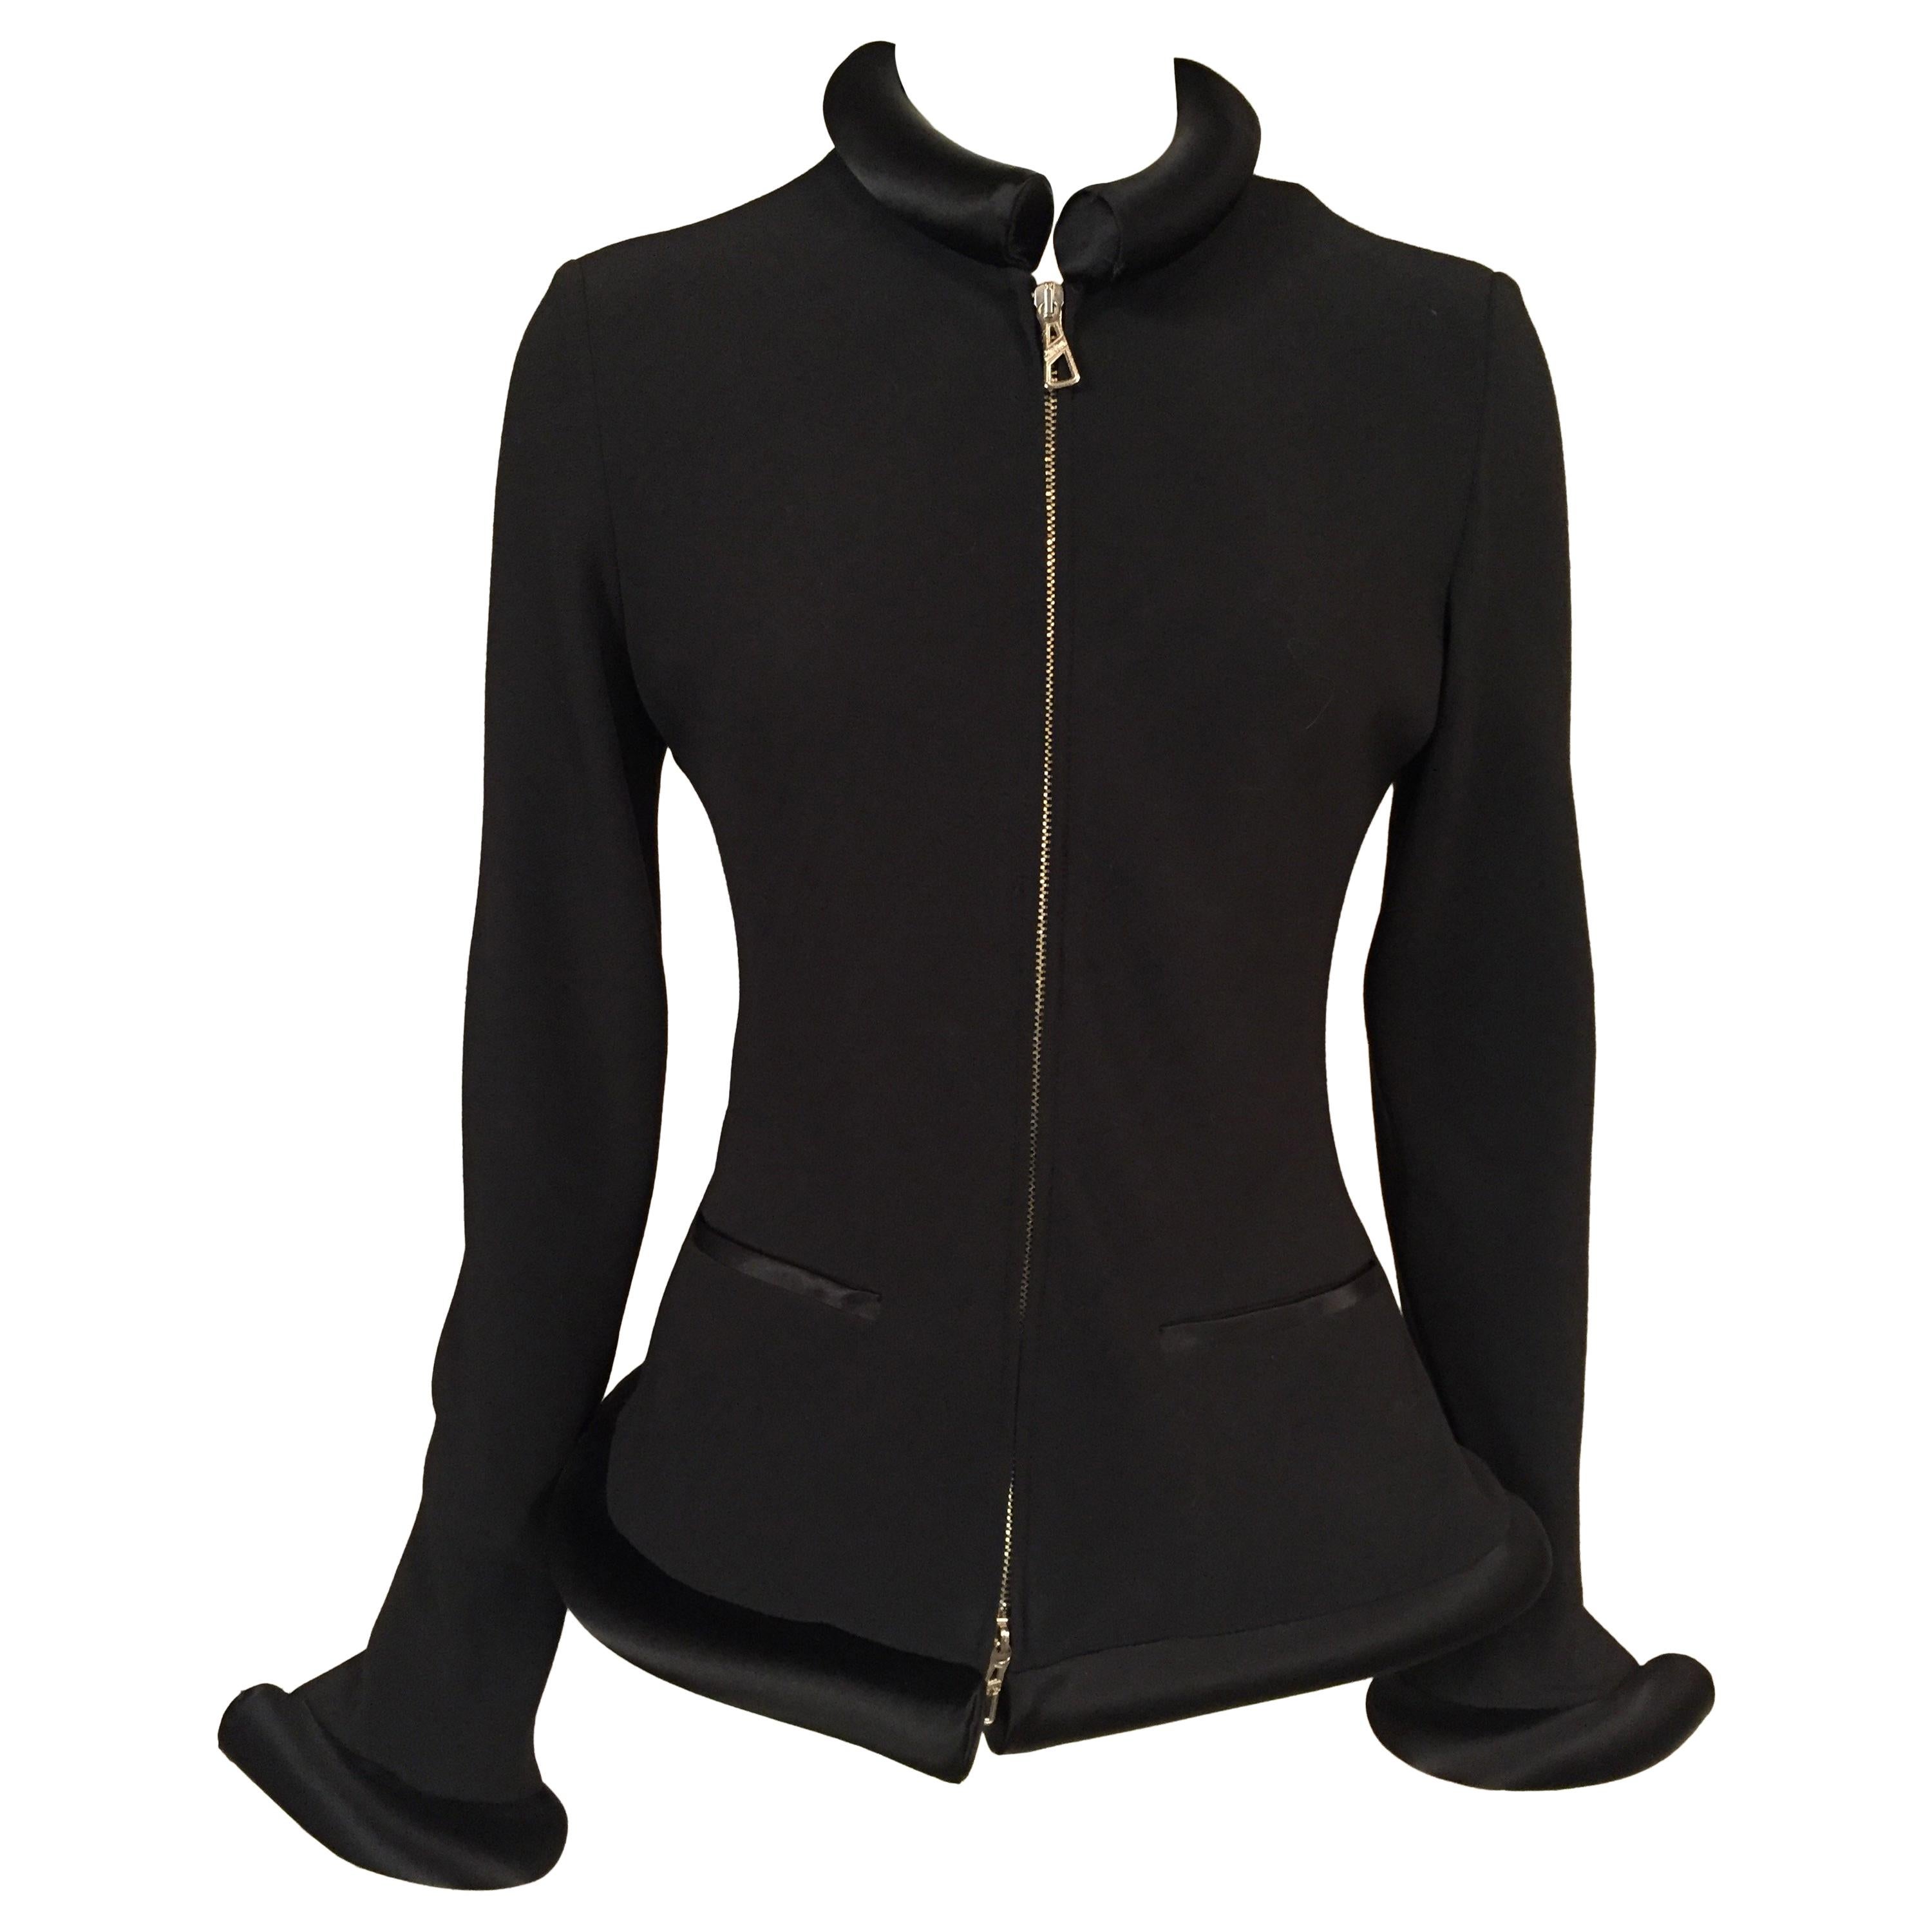 Jean Paul Gaultier Black Jacket with Padded Satin Collar, Cuffs and Hemline